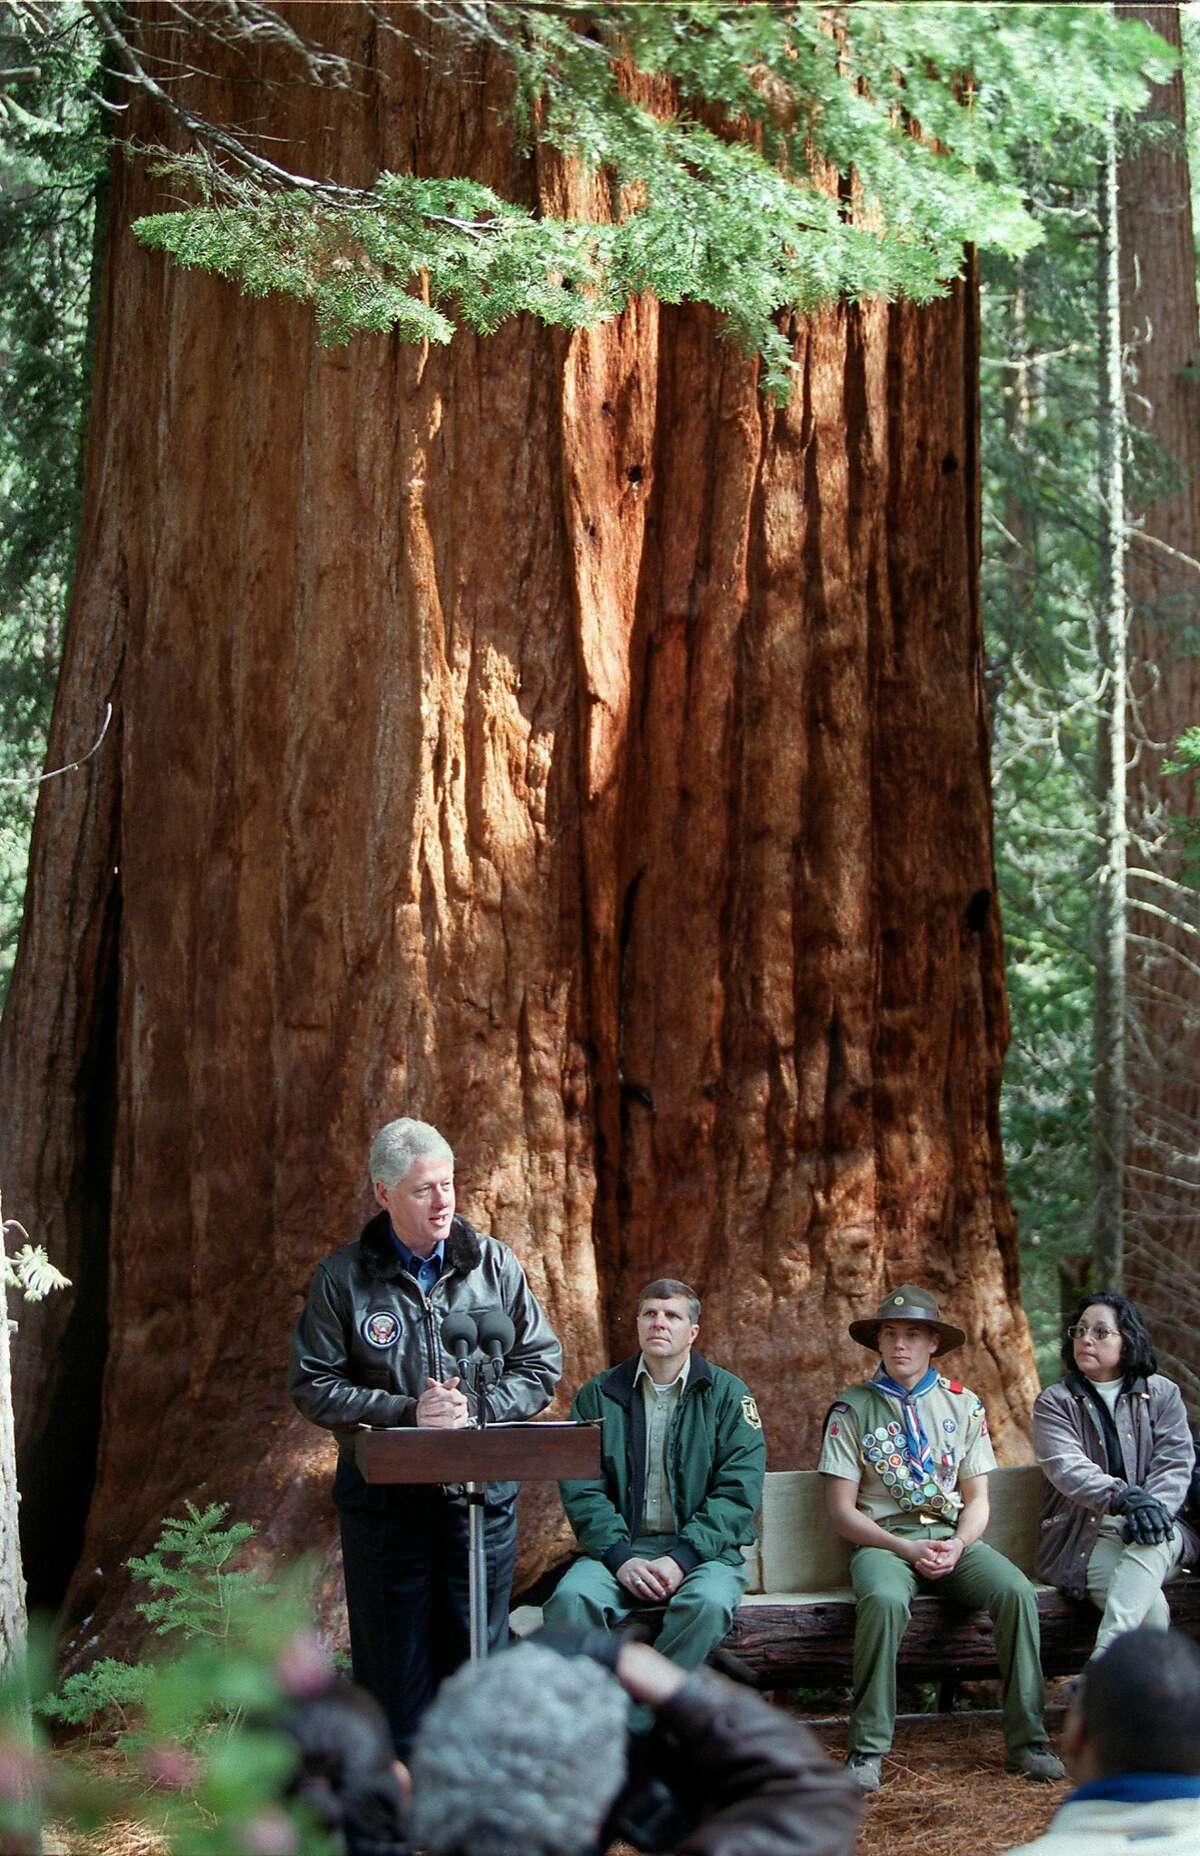 President Clinton addresses a small crowd near the Trail of 100 Giants in Sequoia National Forest, April 15, 2000, before signing a proclamation creating the Giant Sequoia National Monument that will protect groves of ancient sequoias and the forests that surround them. The Supreme Court refused Monday, Oct. 6, 2003, to consider overturning Clinton's orders protecting more than 2 million acres of federal land in five Western States. (AP Photo/Bakersfield Californian, Henry A. Barrios, File)